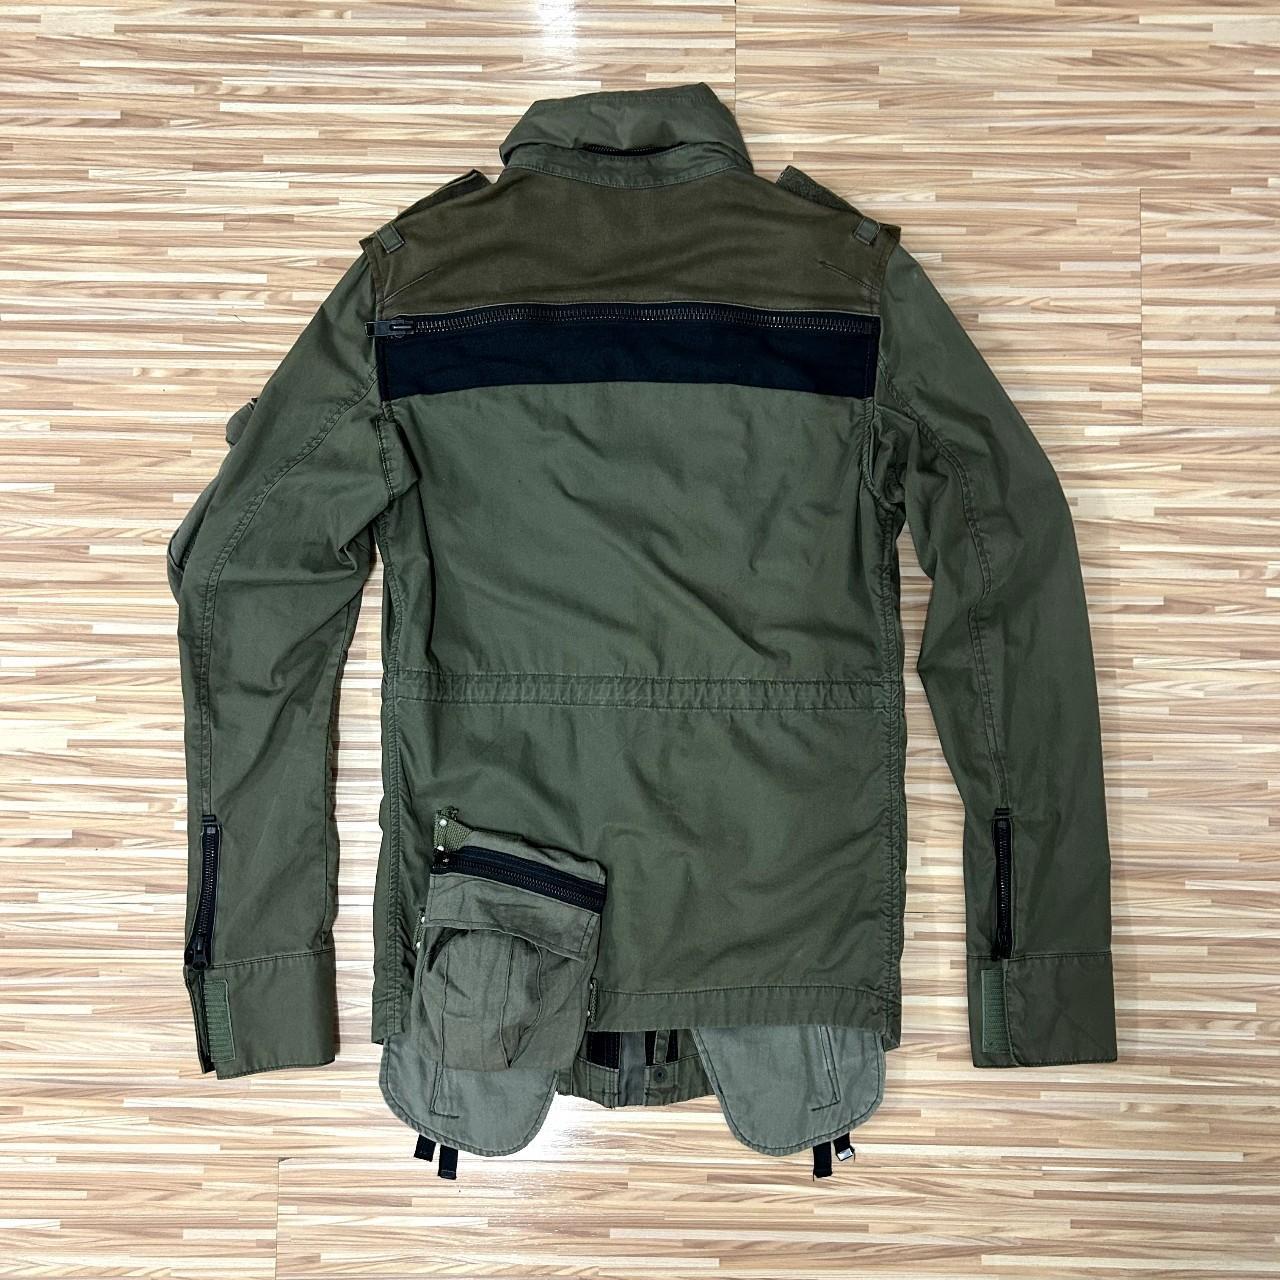 LGB Military Jacket *DM offers all prices...